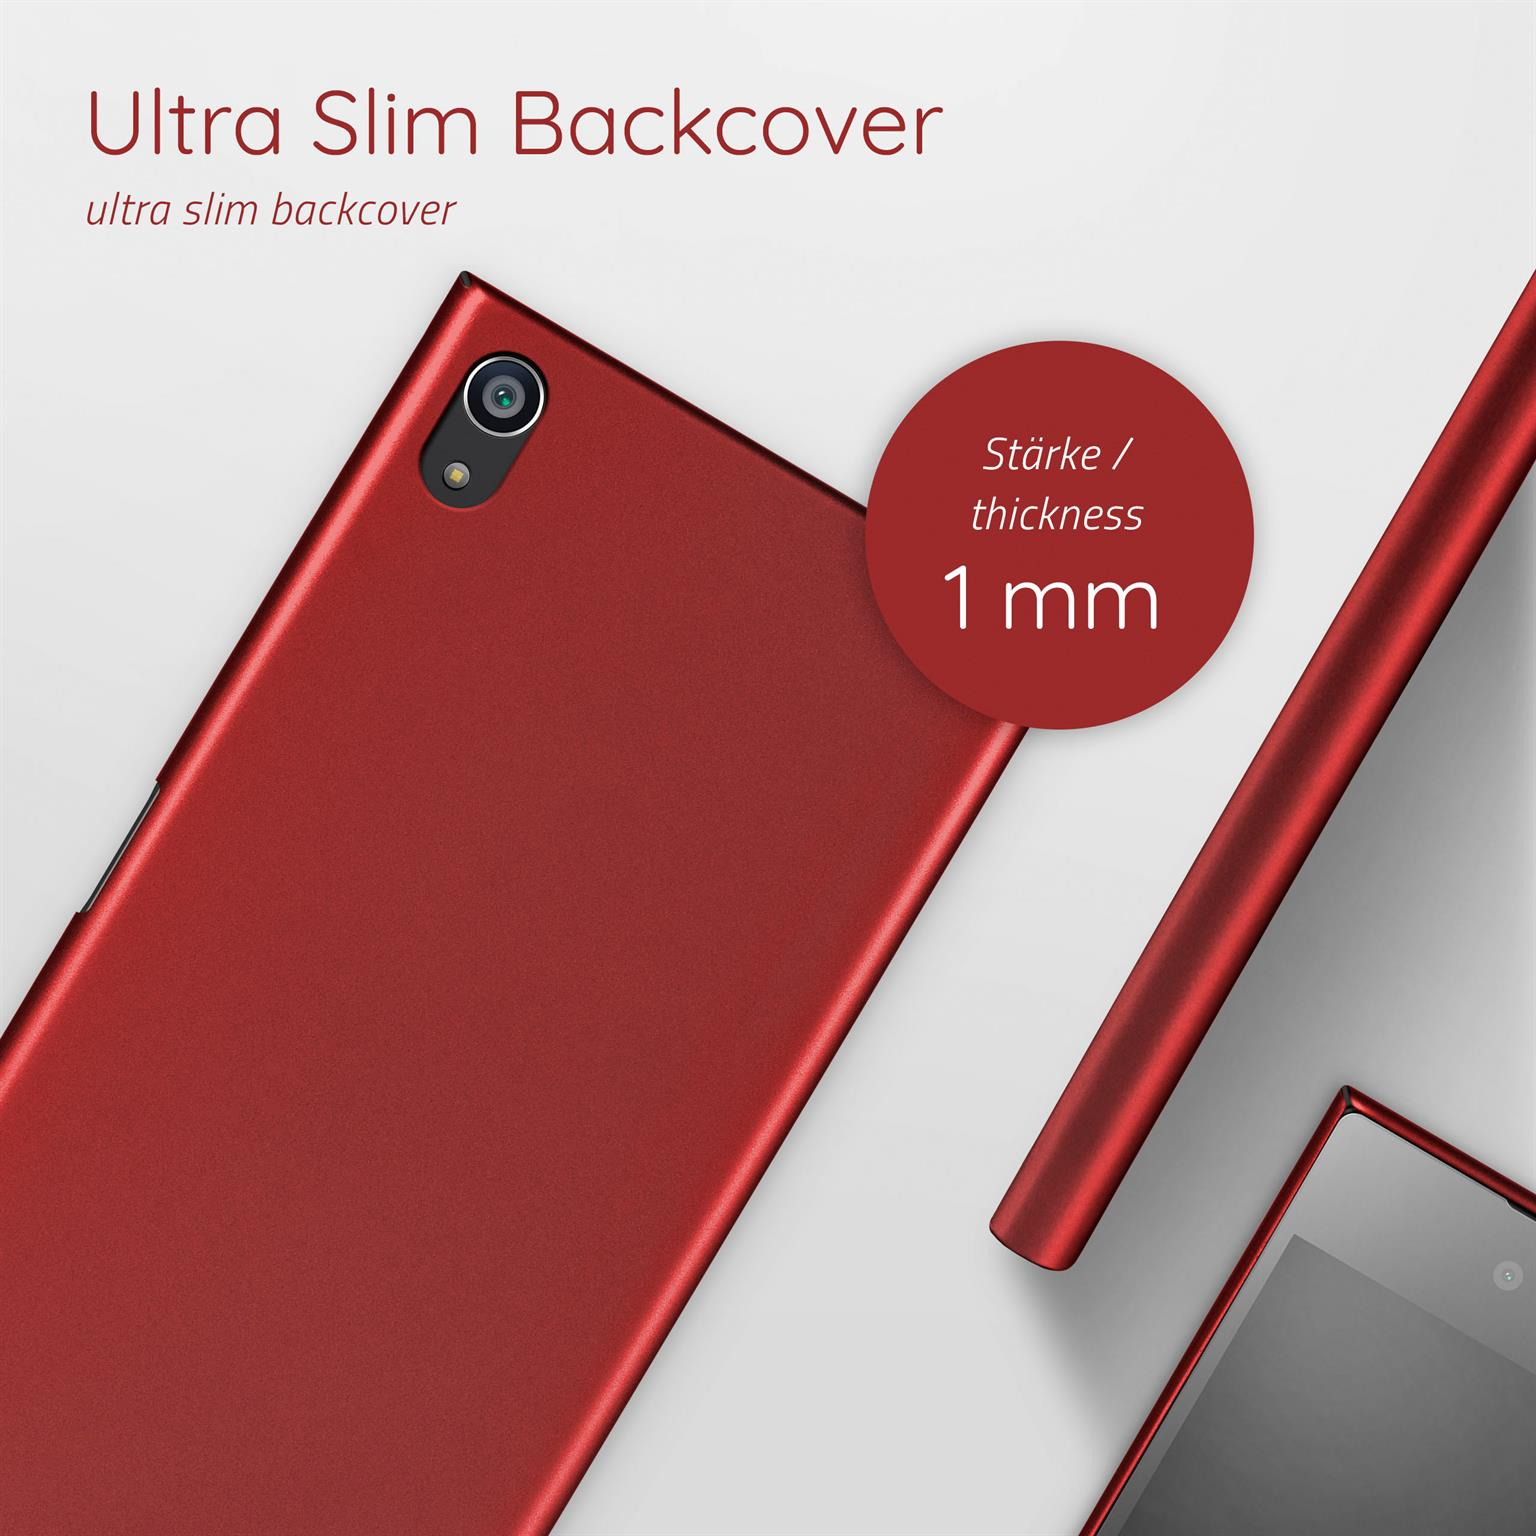 Backcover, Alpha Z5, Case, Xperia Rot Sony, MOEX